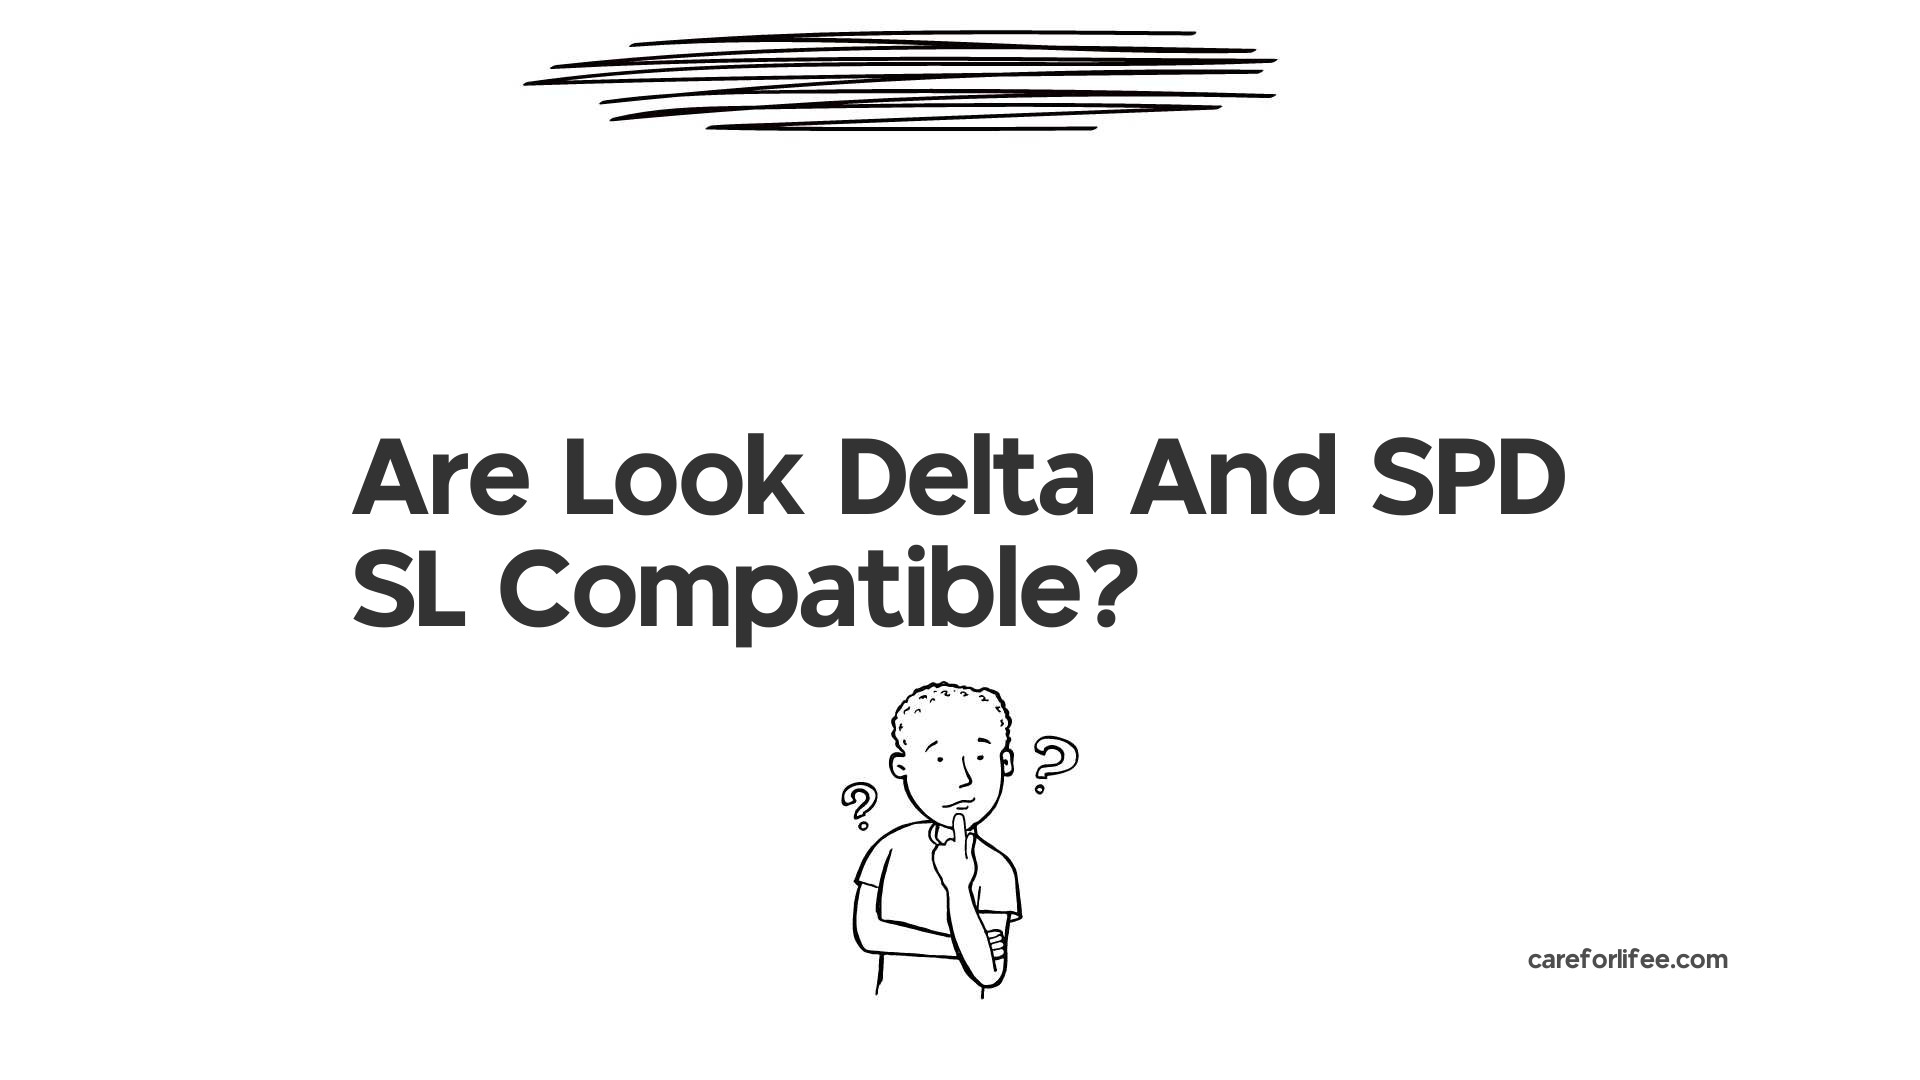 Are Look Delta And SPD SL Compatible?